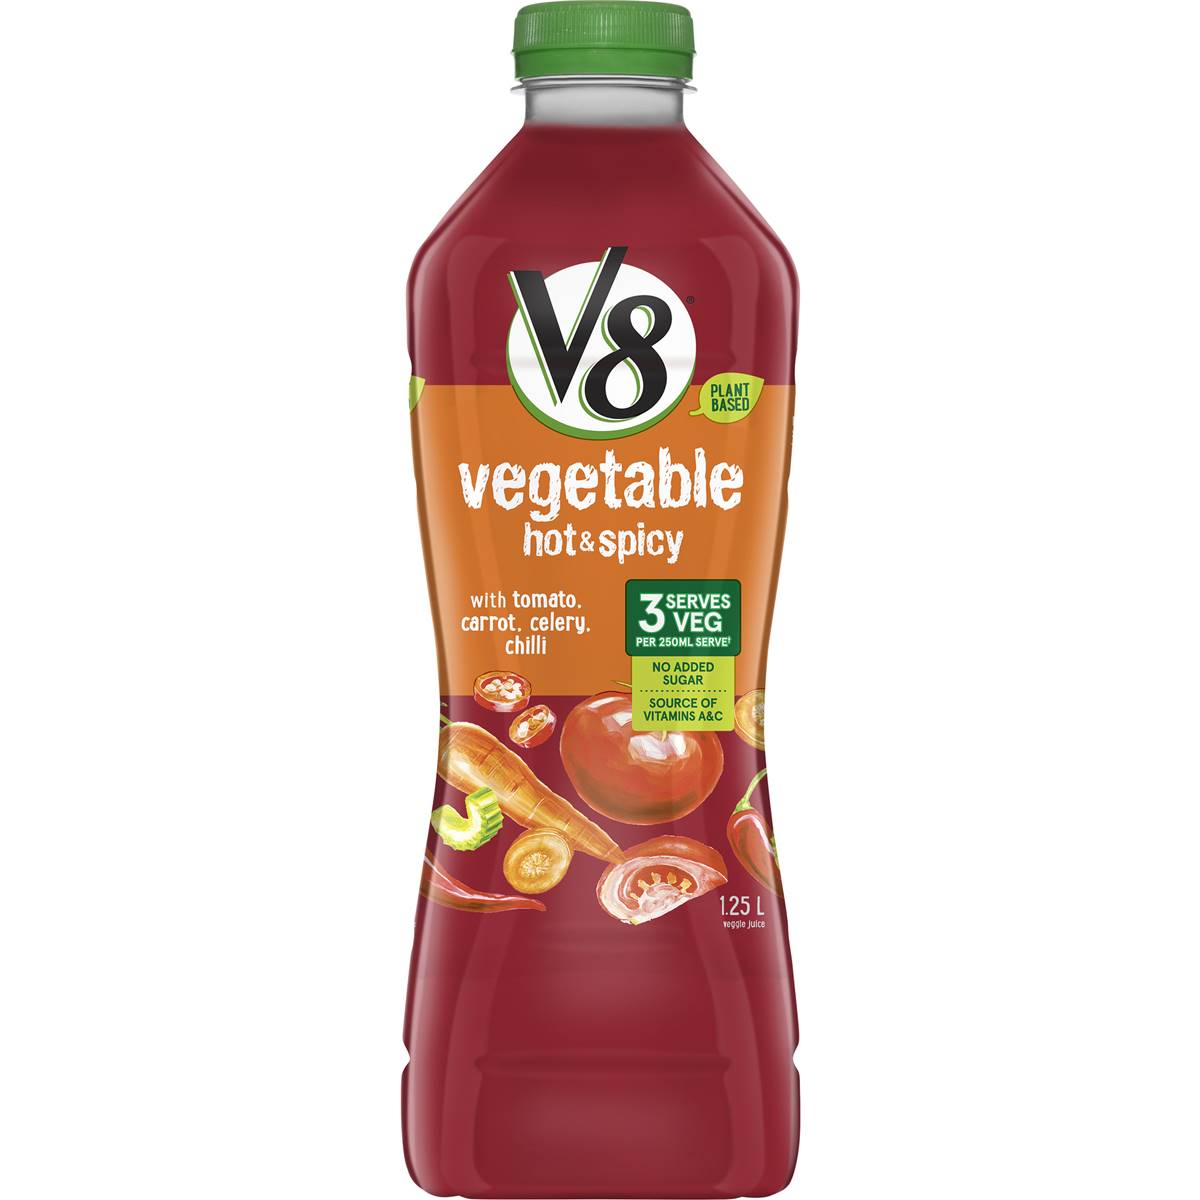 Calories in V8 Vegetable Juice Hot & Spicy